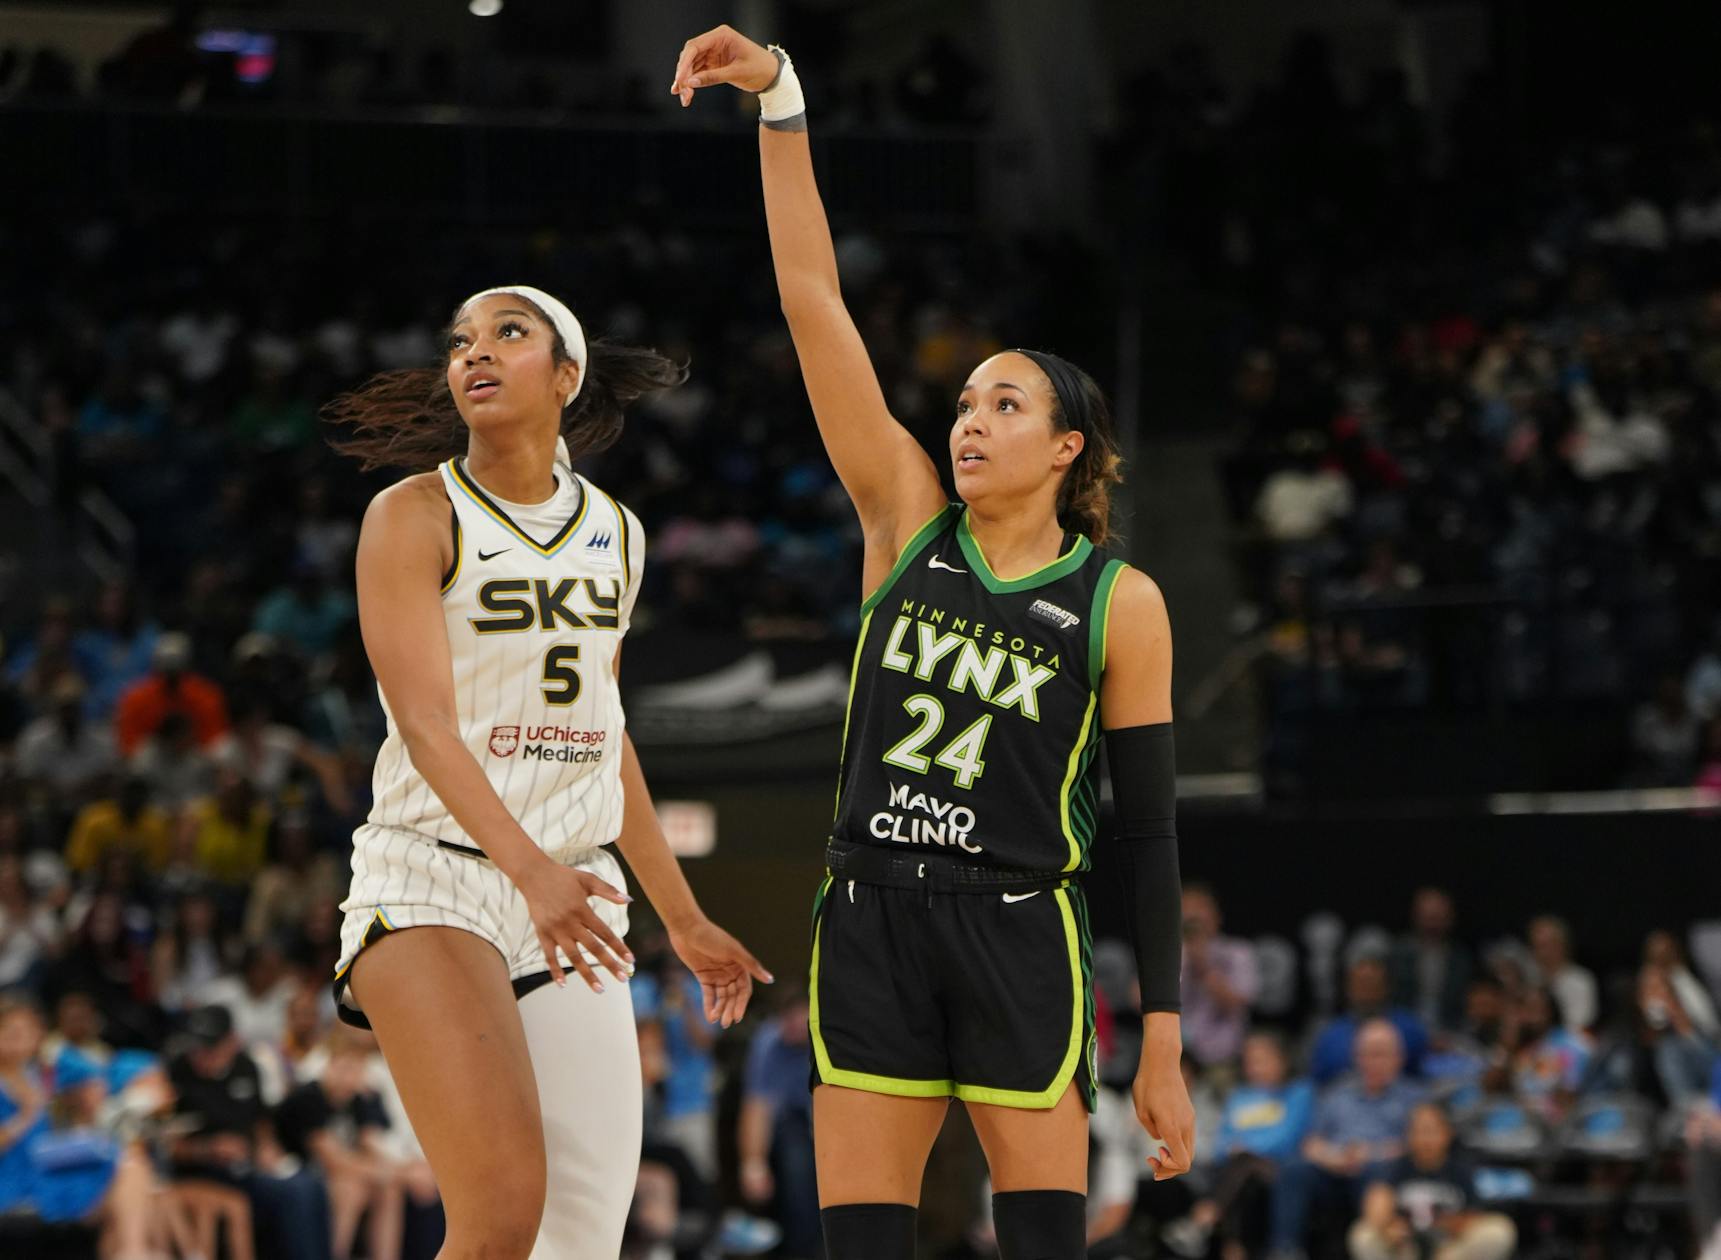 Lynx beat Sky 70-62 after rallying in the fourth quarter